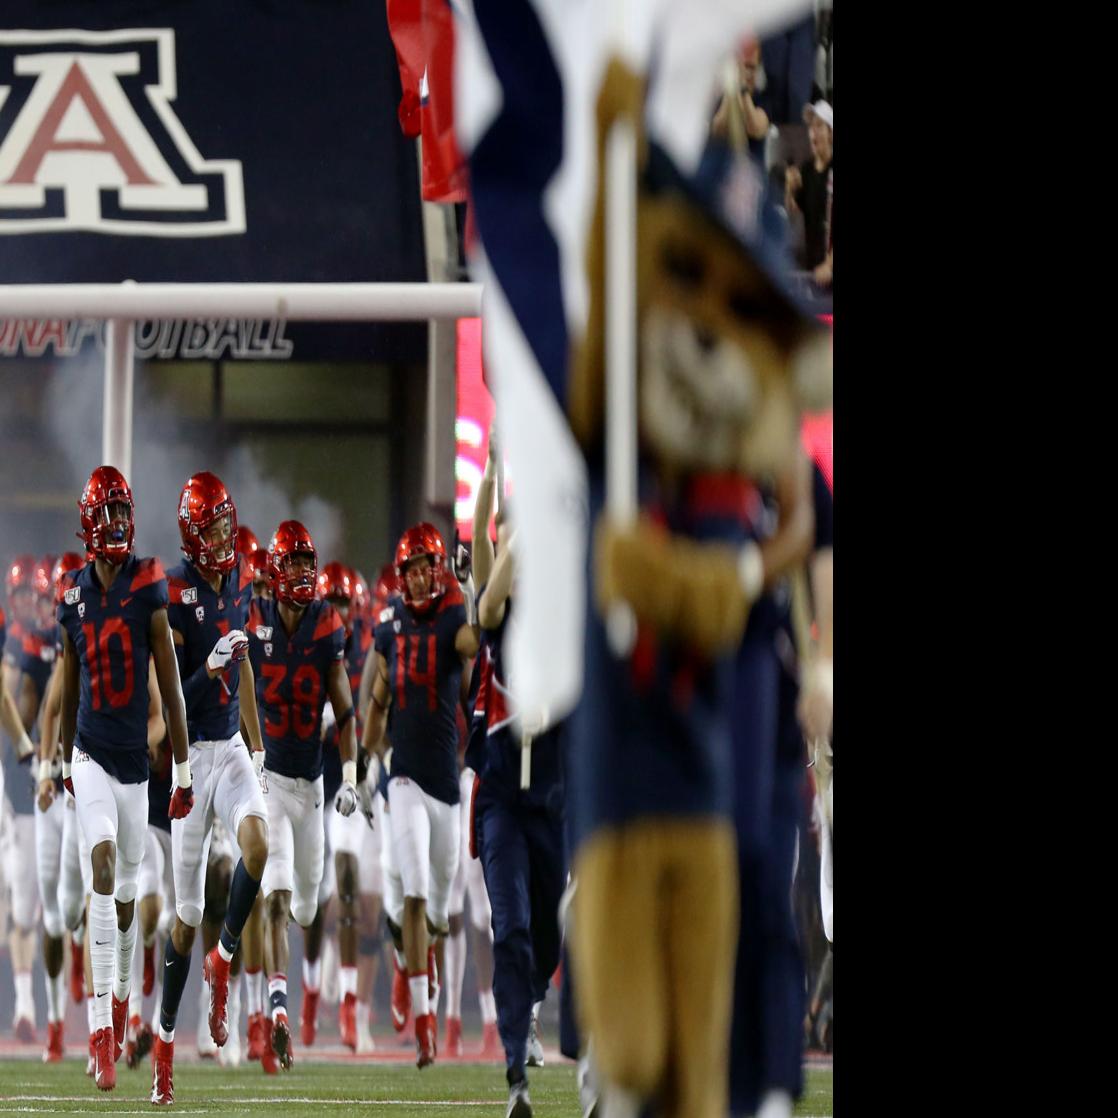 They Want Bama Wildcats Schedule Home And Home Football Series With Crimson Tide Arizona Wildcats Football Tucson Com